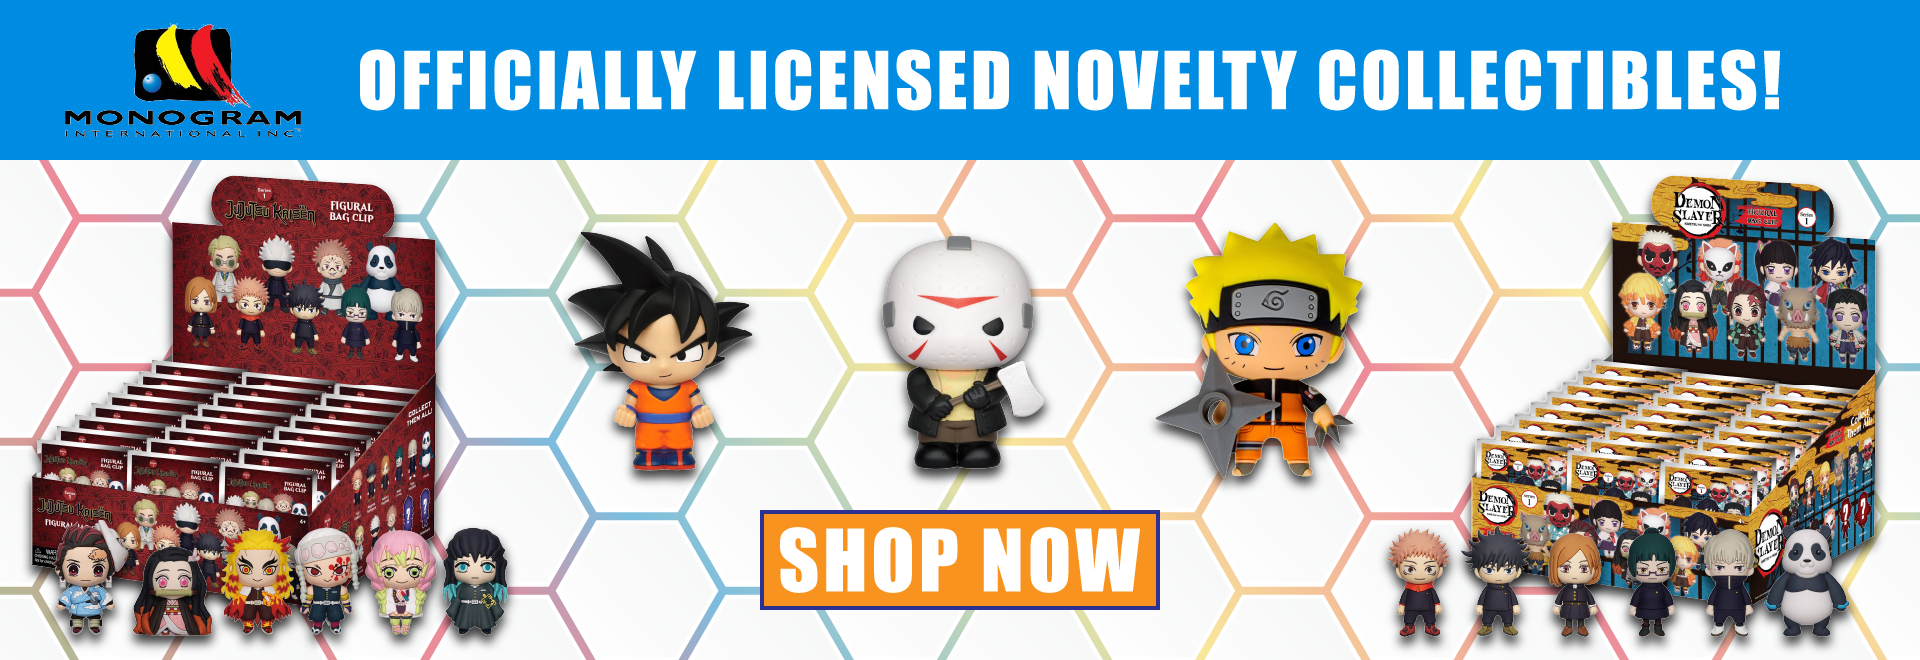 Monogram International - Officially licensed novelty collectibles!